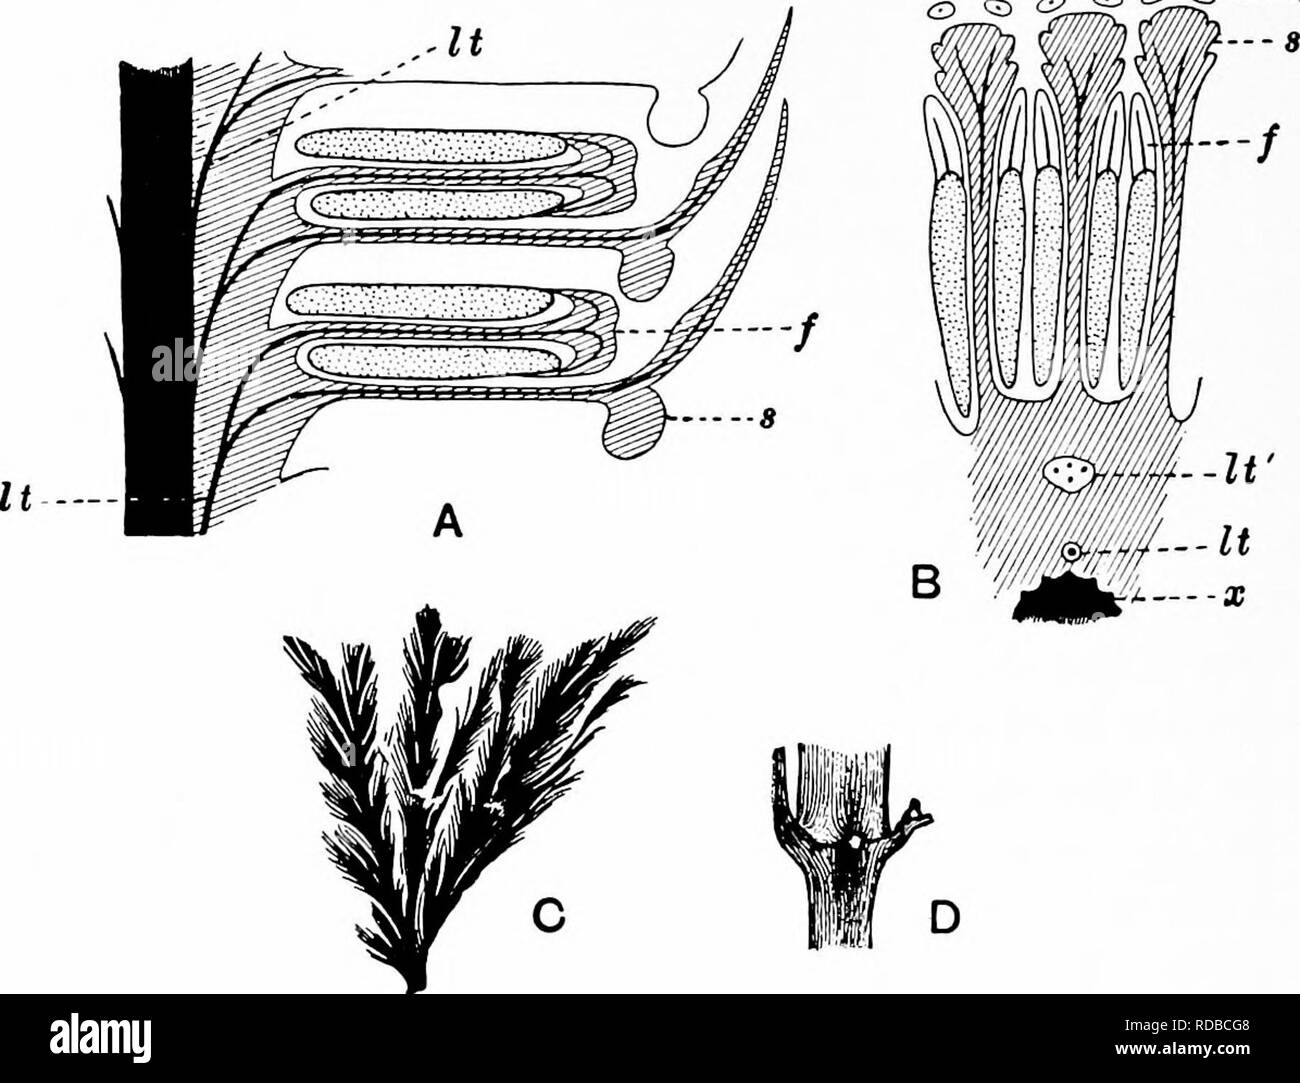 . Fossil plants : for students of botany and geology . Paleobotany. SPHENOPHYLLALES [CH. been found. The cortex consists of slightly elongated rather thick-walled tissue containing secretory sacs. Crowded super- posed whorls of bracts (or sporophylls), usually twelve in each whorl, are borne on the axis and each sporophyll receives a single vascular bundle from one of the vertical ridges of the xylem column (fig. 117, A, It). The members of each whorl are connate at the base : from this narrow collar each sporophyll &lt;^ &lt;3 t^^ O,. Fig. 117. A, B. Cheirostrohus pettycurensis Scott. (After  Stock Photo